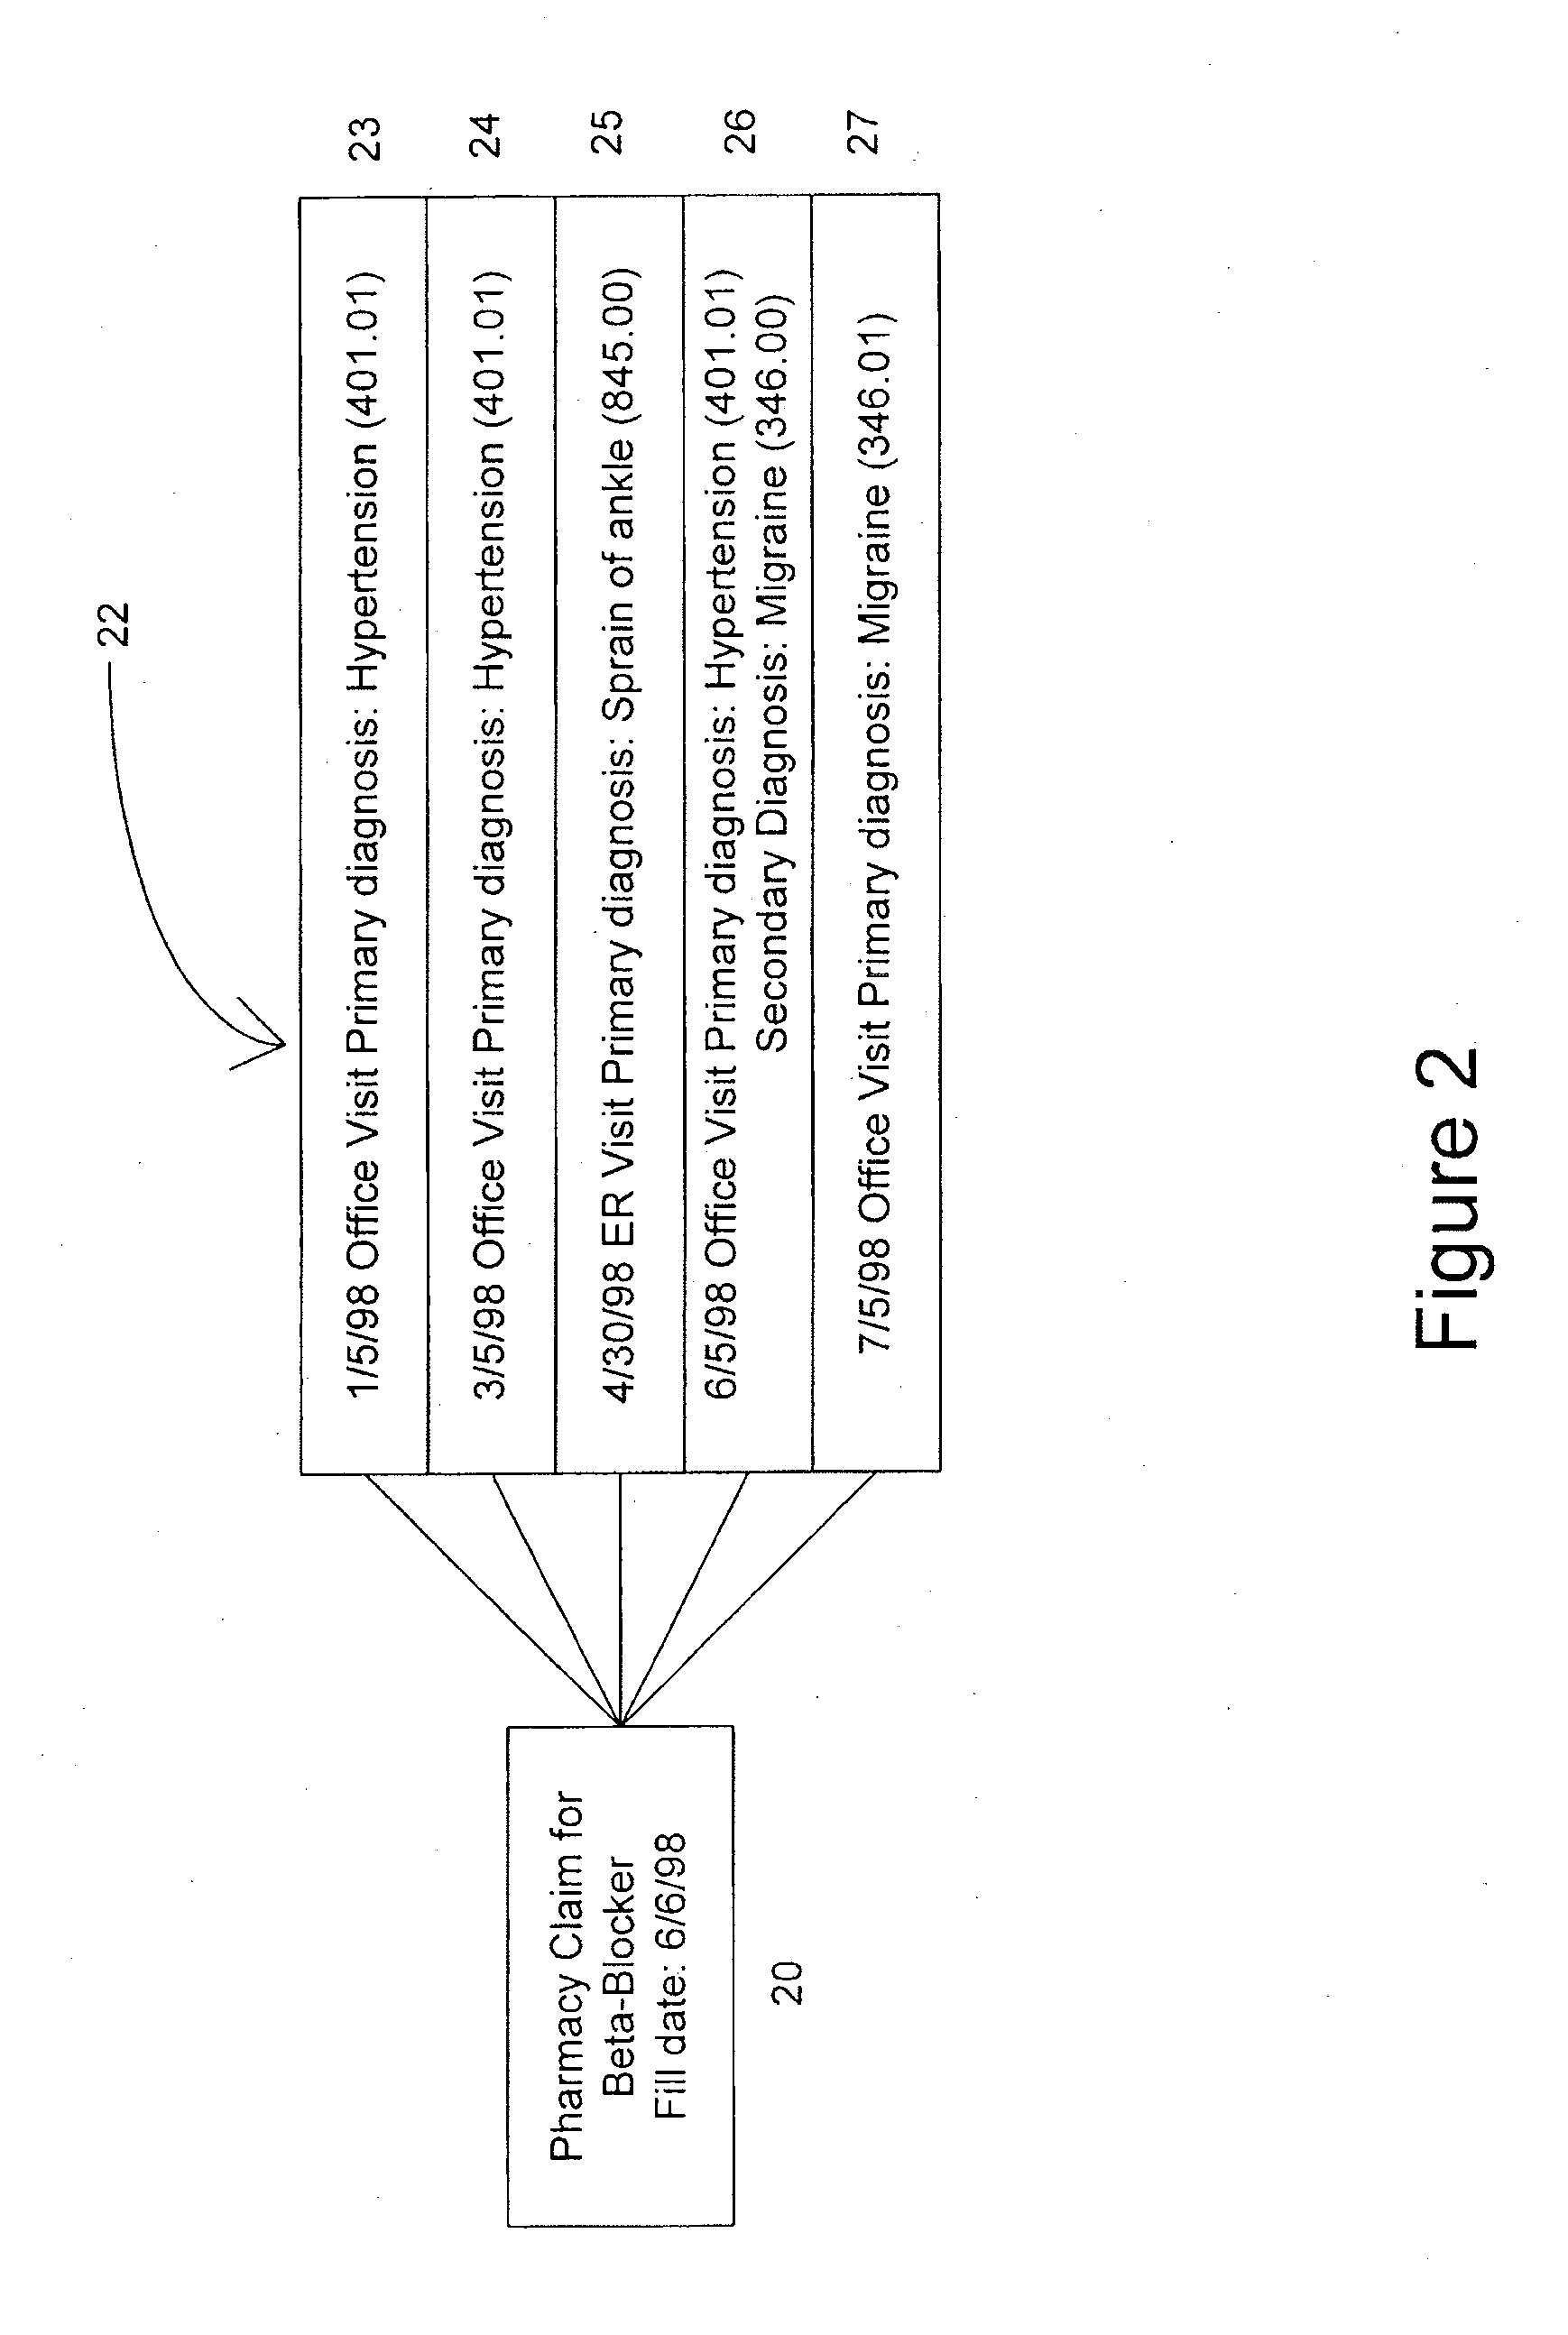 System and method of drug disease matching